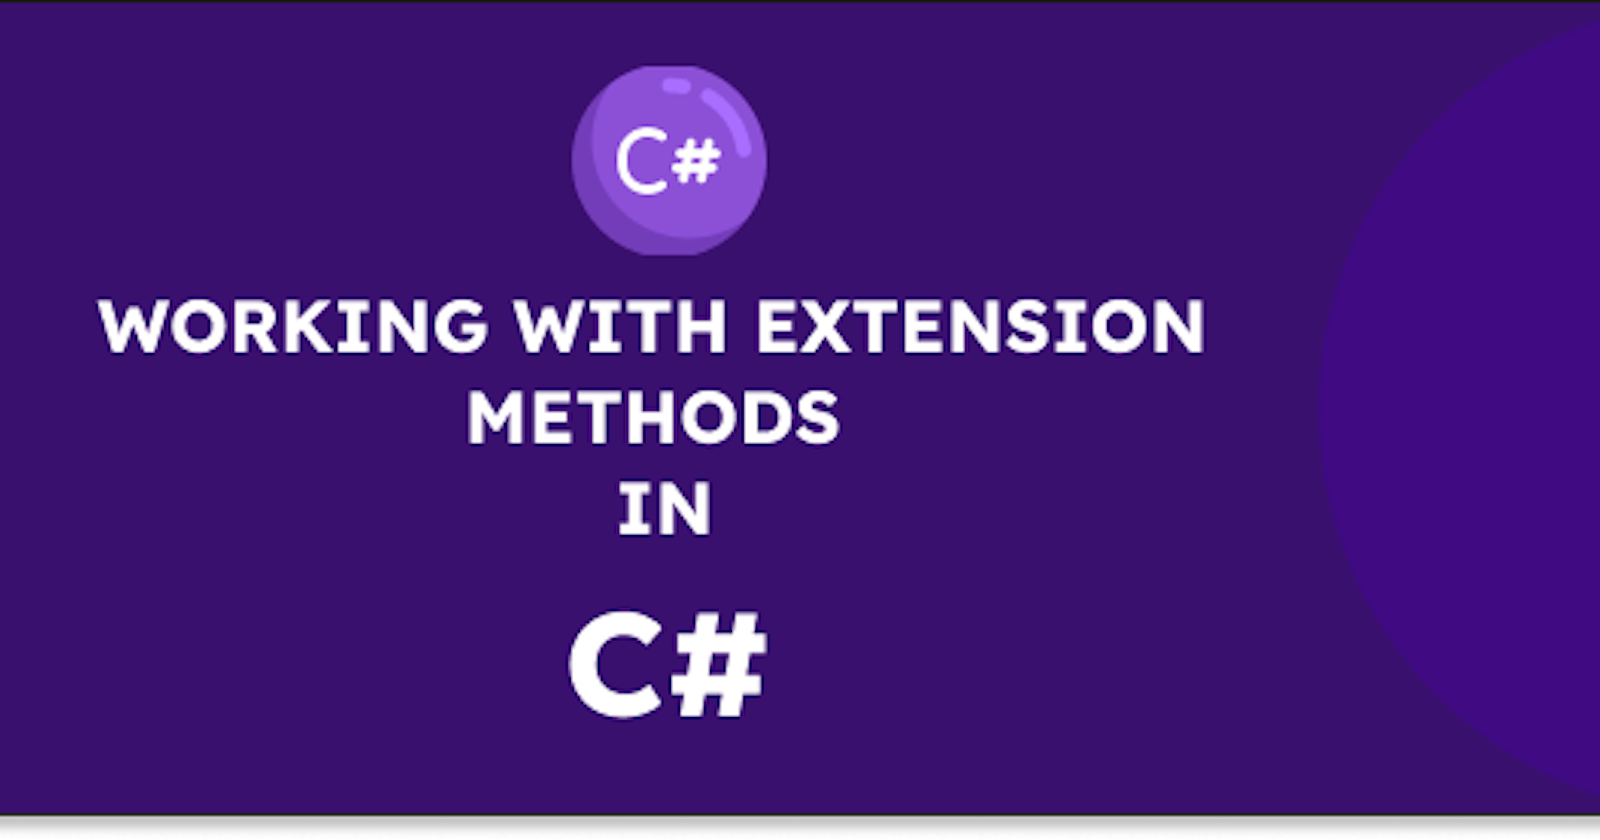 Working With Extension Methods in C#